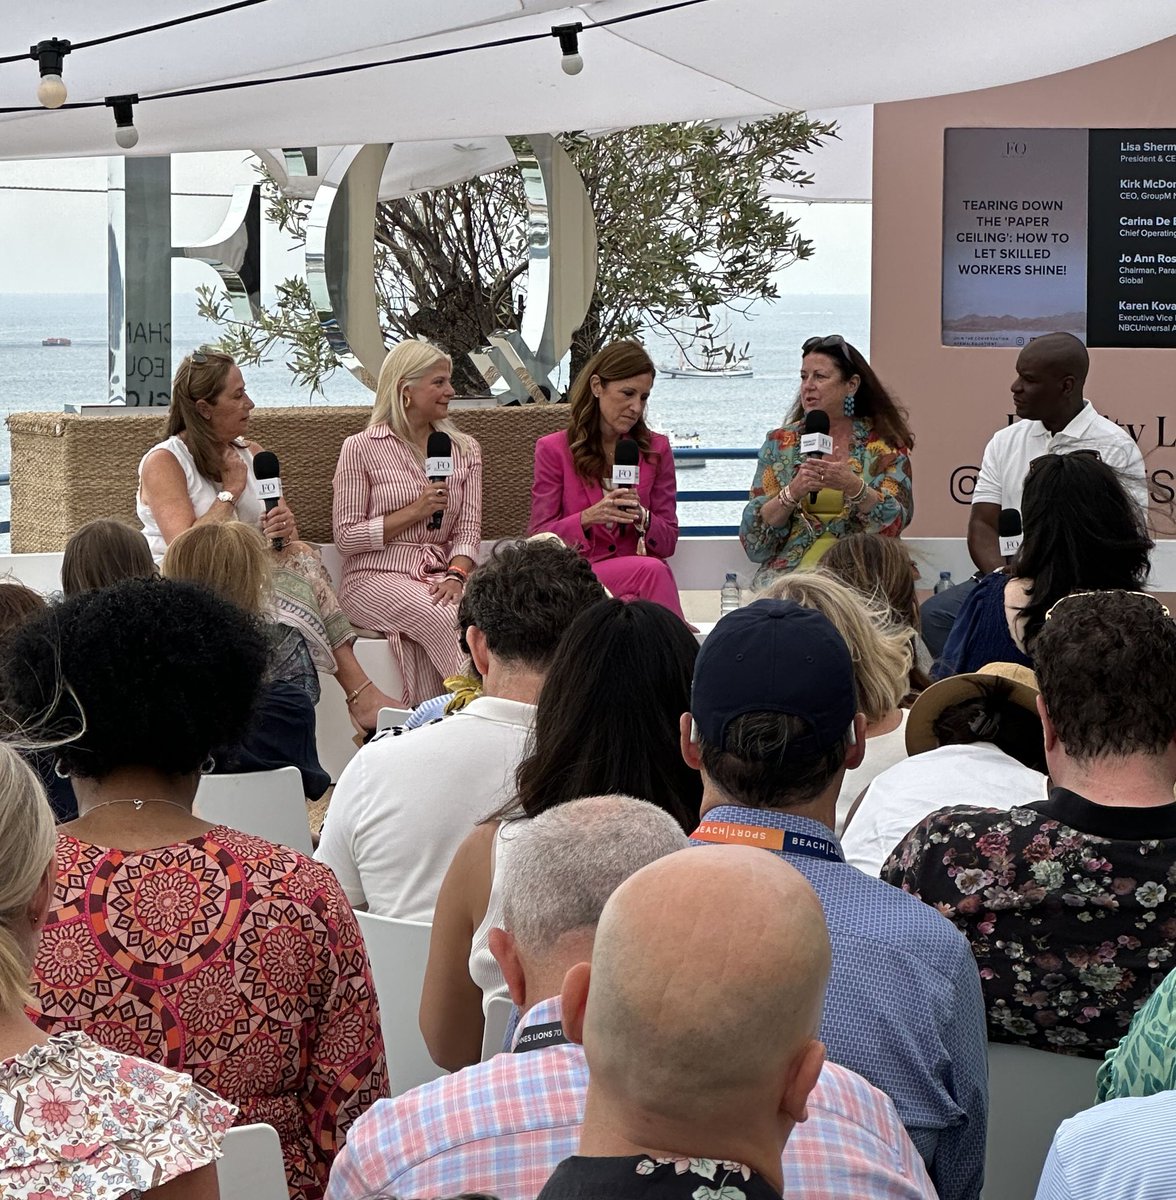 Proud to have The Paper Ceiling at #CannesLions2023 for @DebloisDe's panel with C-suite leaders on how organizations can evolve their hiring practices to empower workers 'Skilled Through Alternative Routes'.

#OgilvyCannes #TearThePaperCeiling @AdCouncil
@OpptyatWork @OgilvyNY